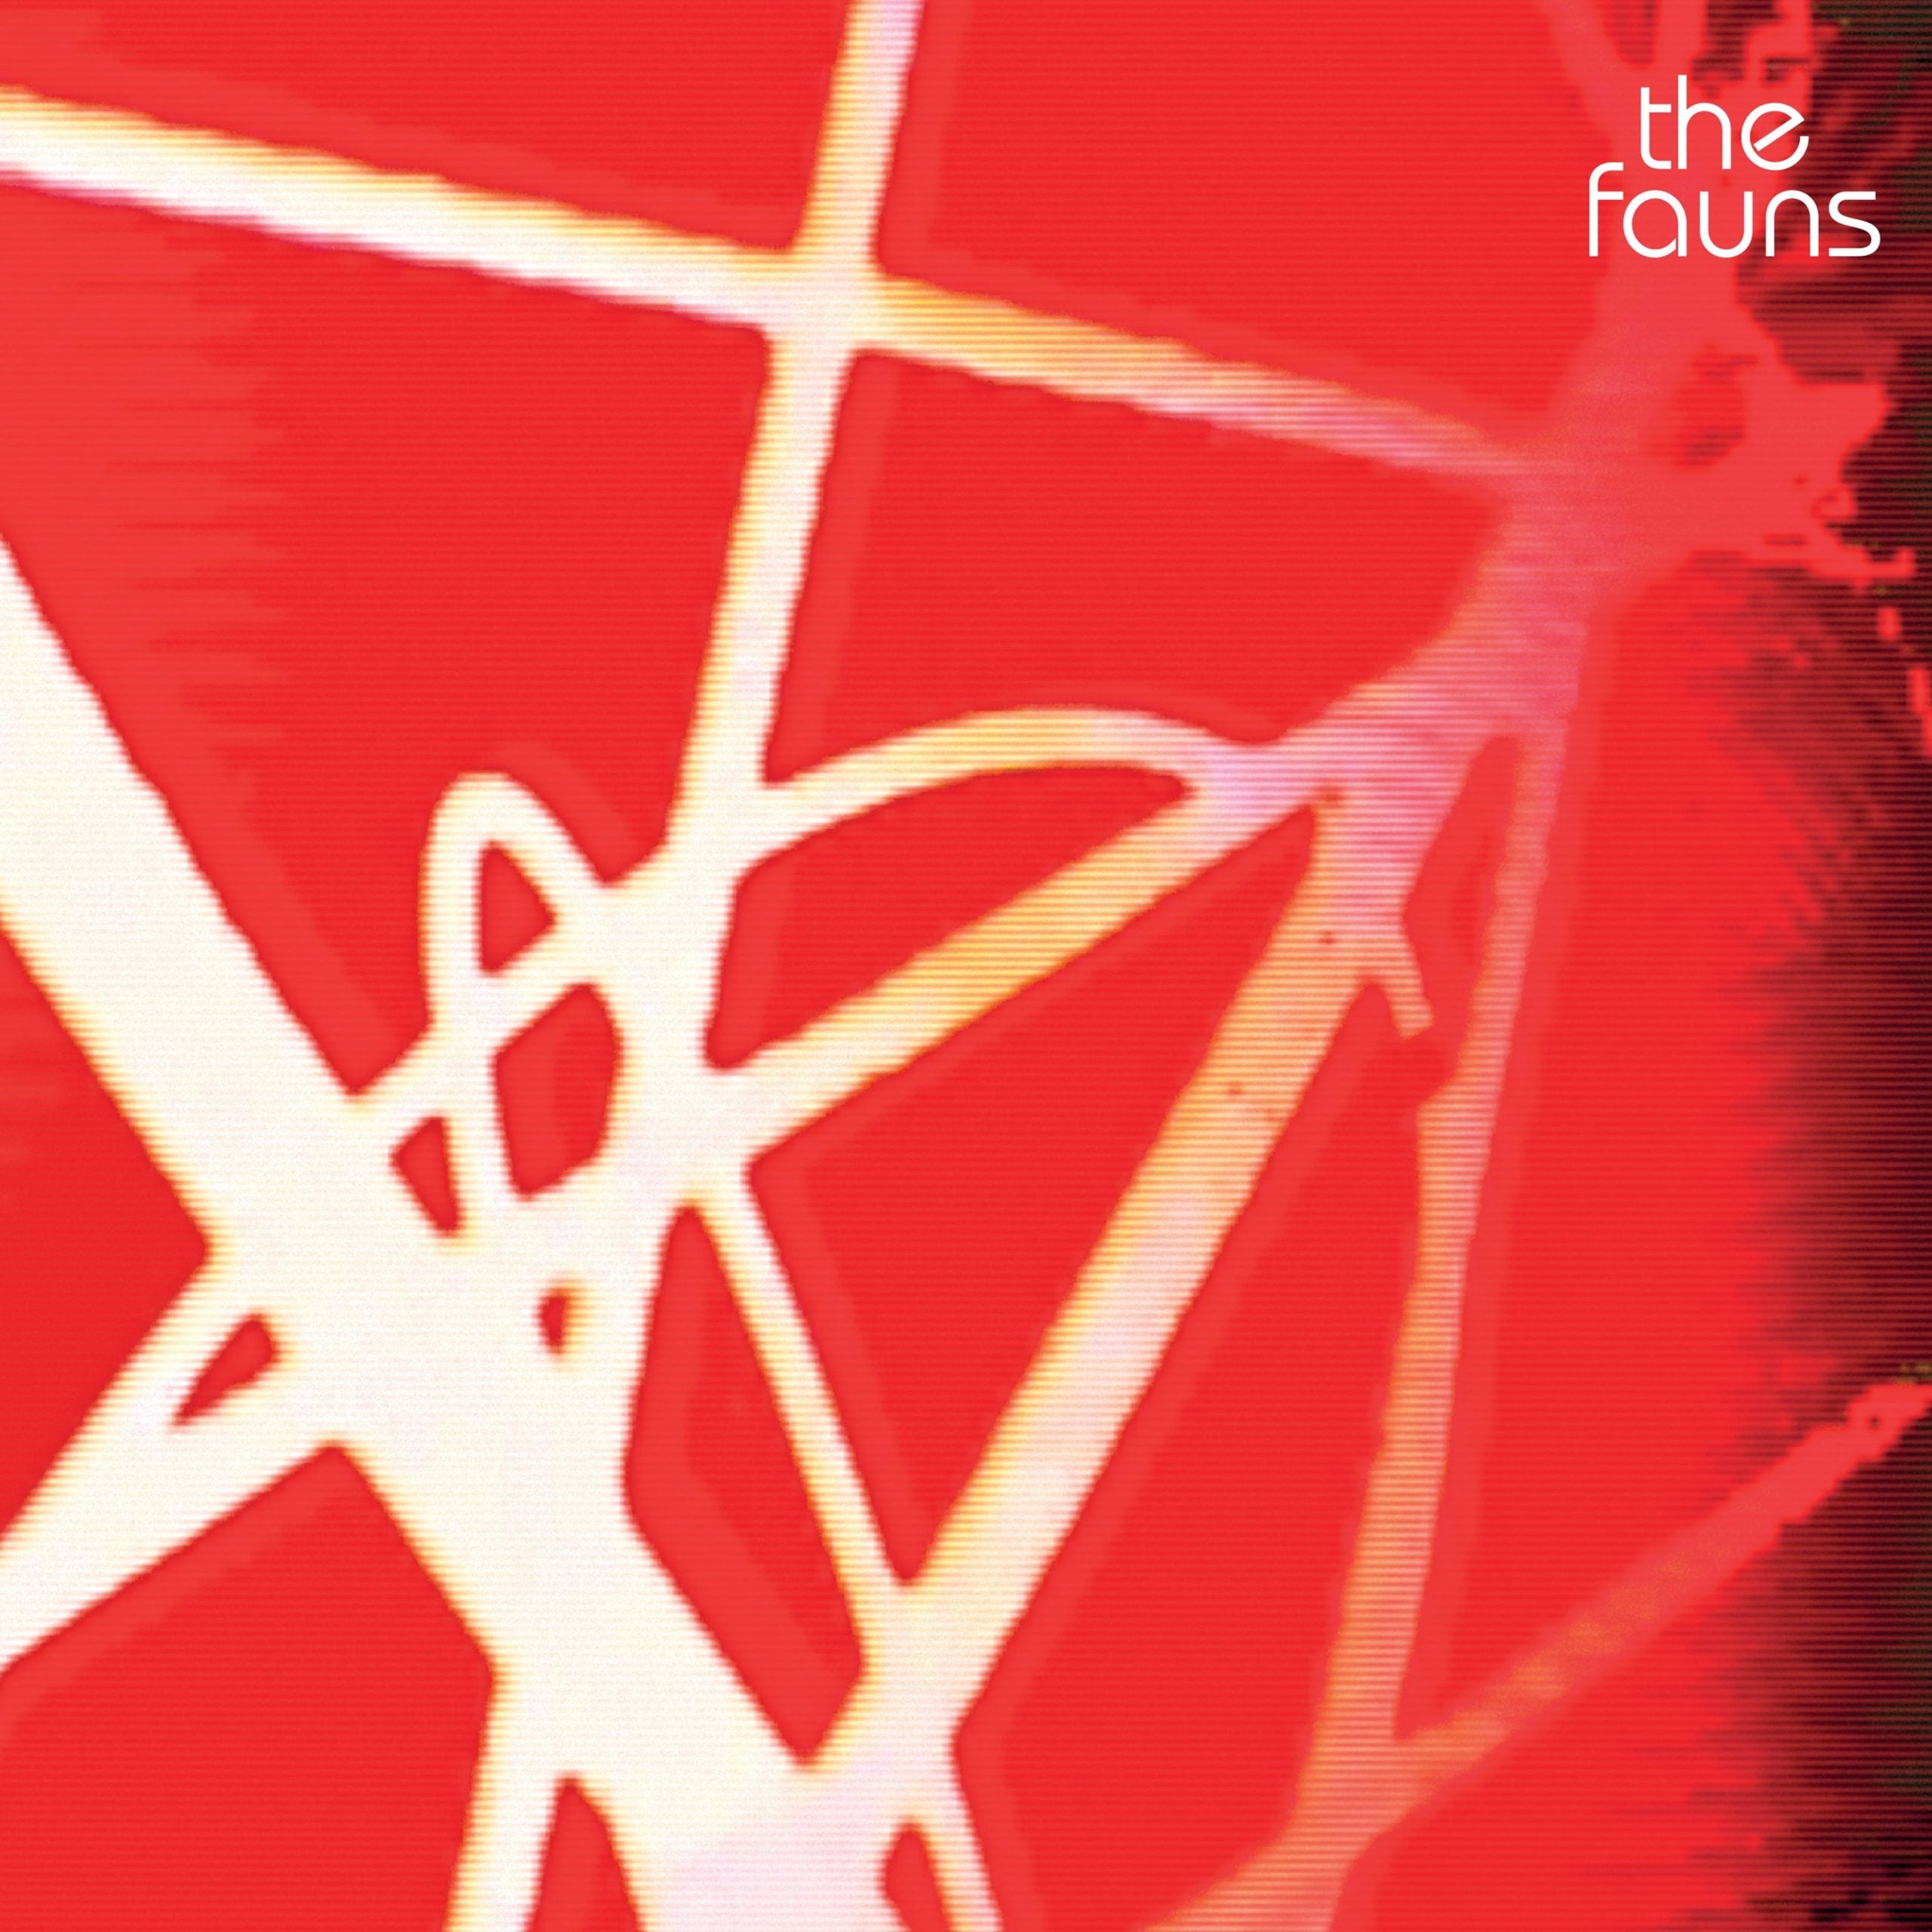 The Fauns - How Lost: Transparent Red Vinyl LP